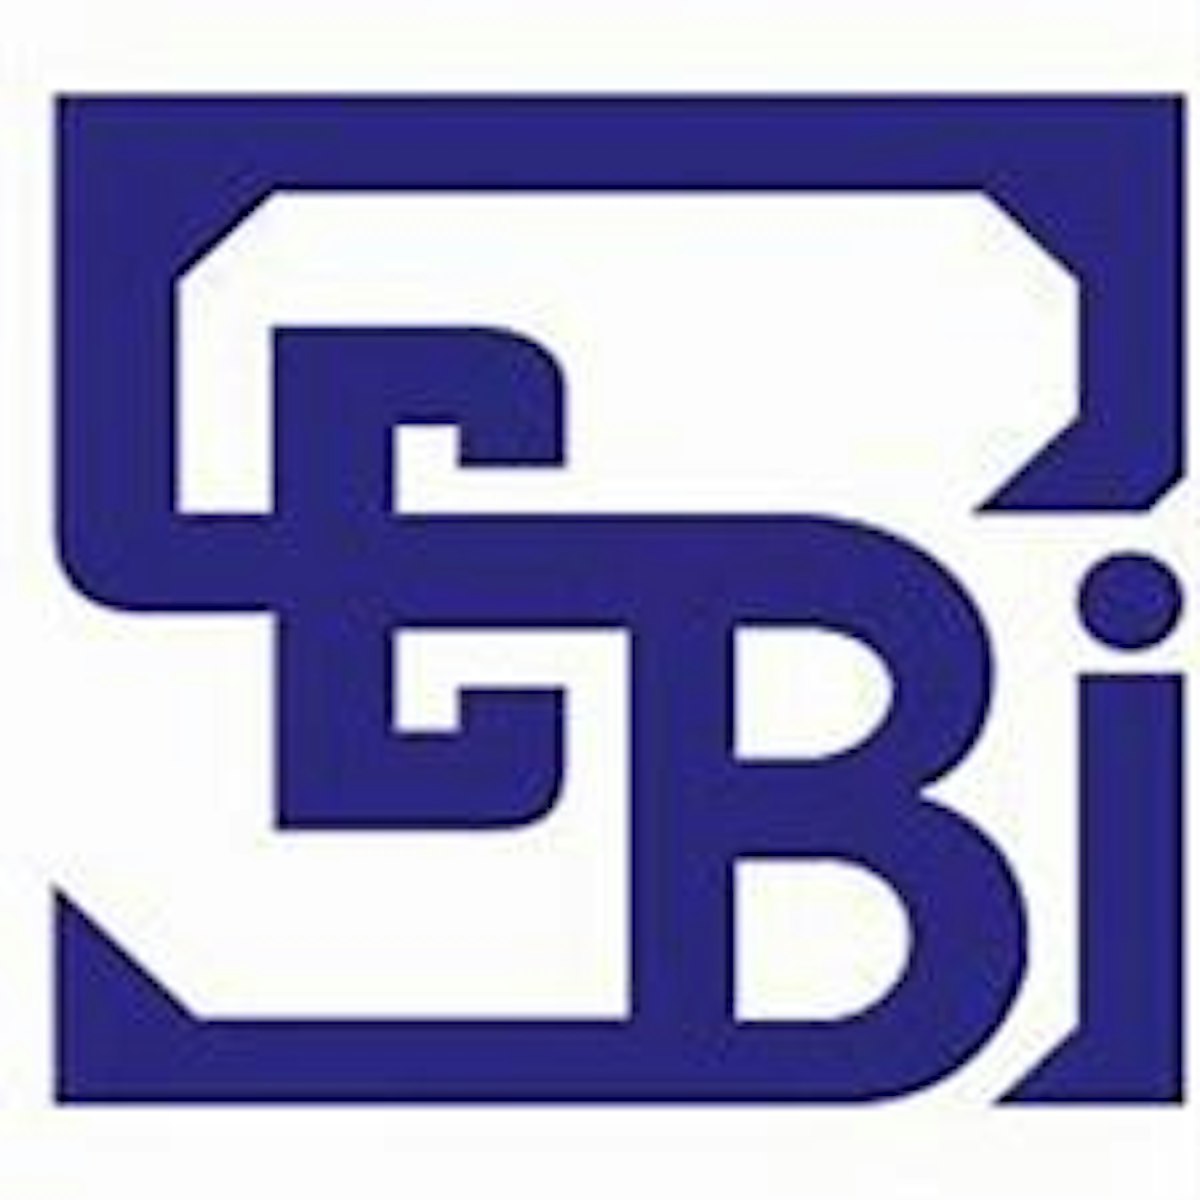 SEBI extends the deadline for implementation of new SCORES norms to